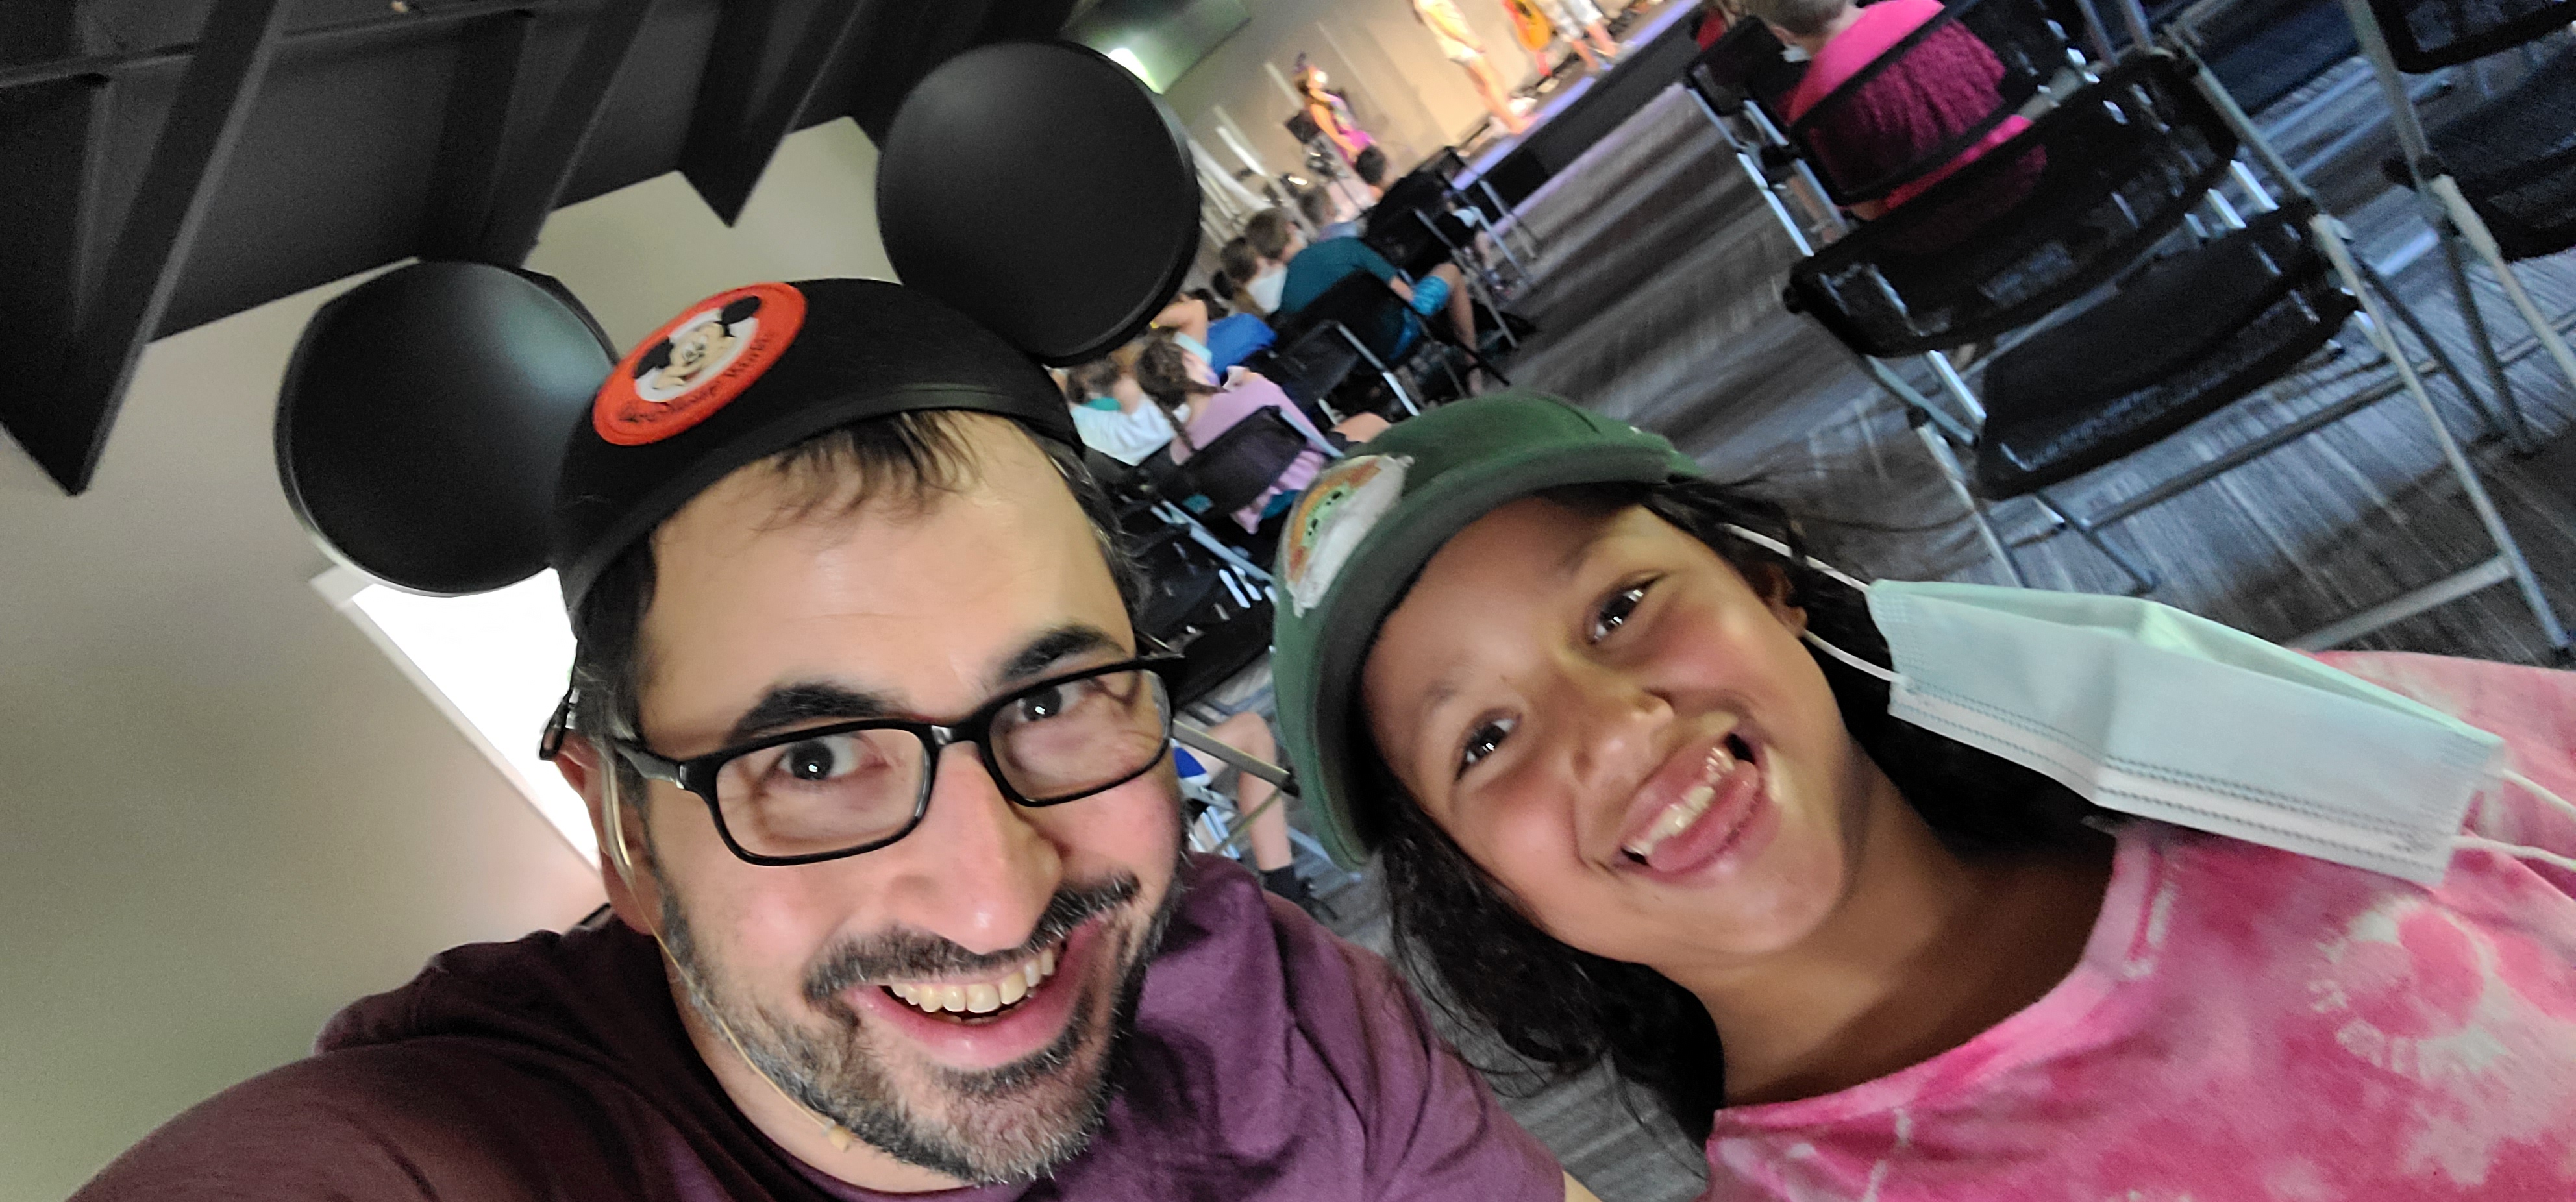 This is"N," a 10-year-old Camper. She and I traded hats. Whaddya think? Does I look good in Mickey Mouse ears???